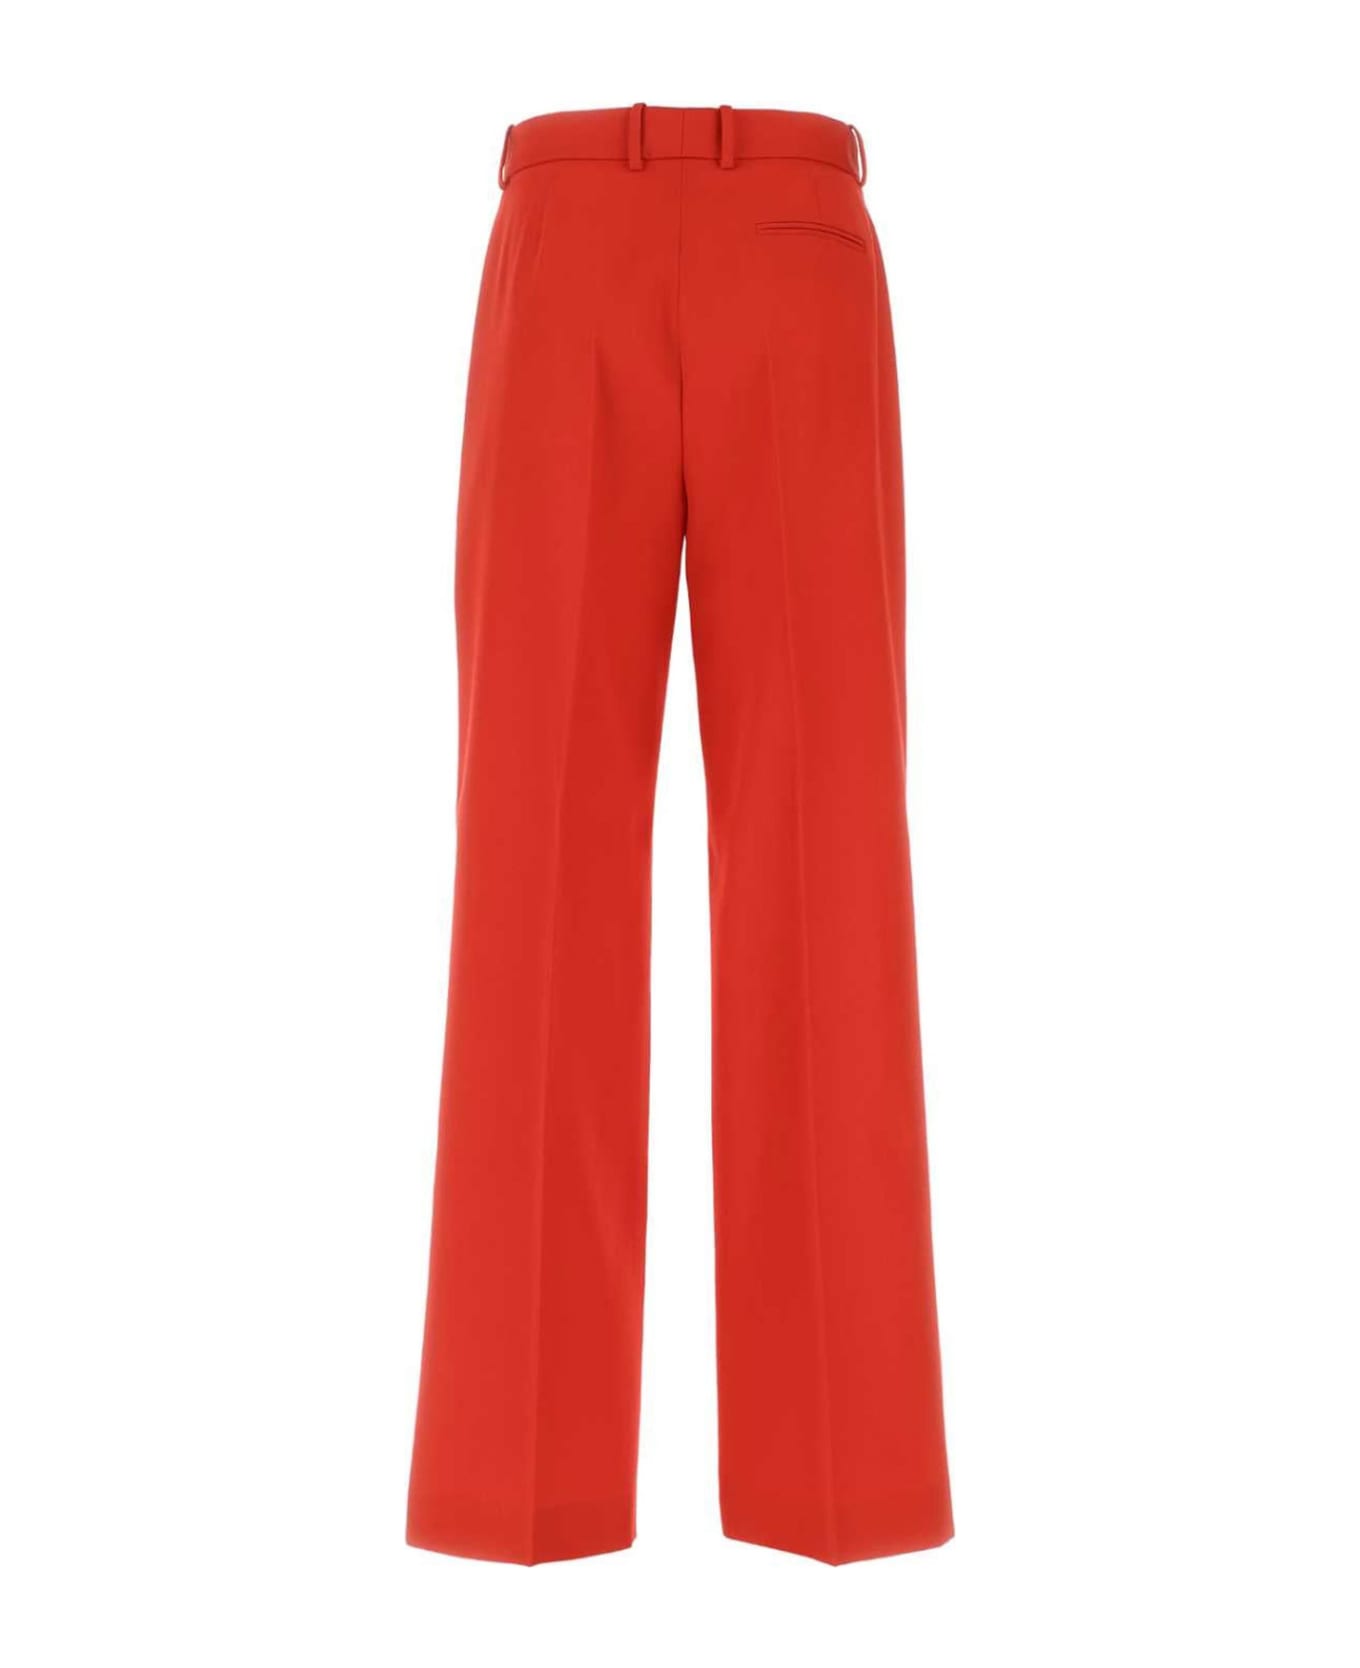 Lanvin Poppy Red Pants - Red